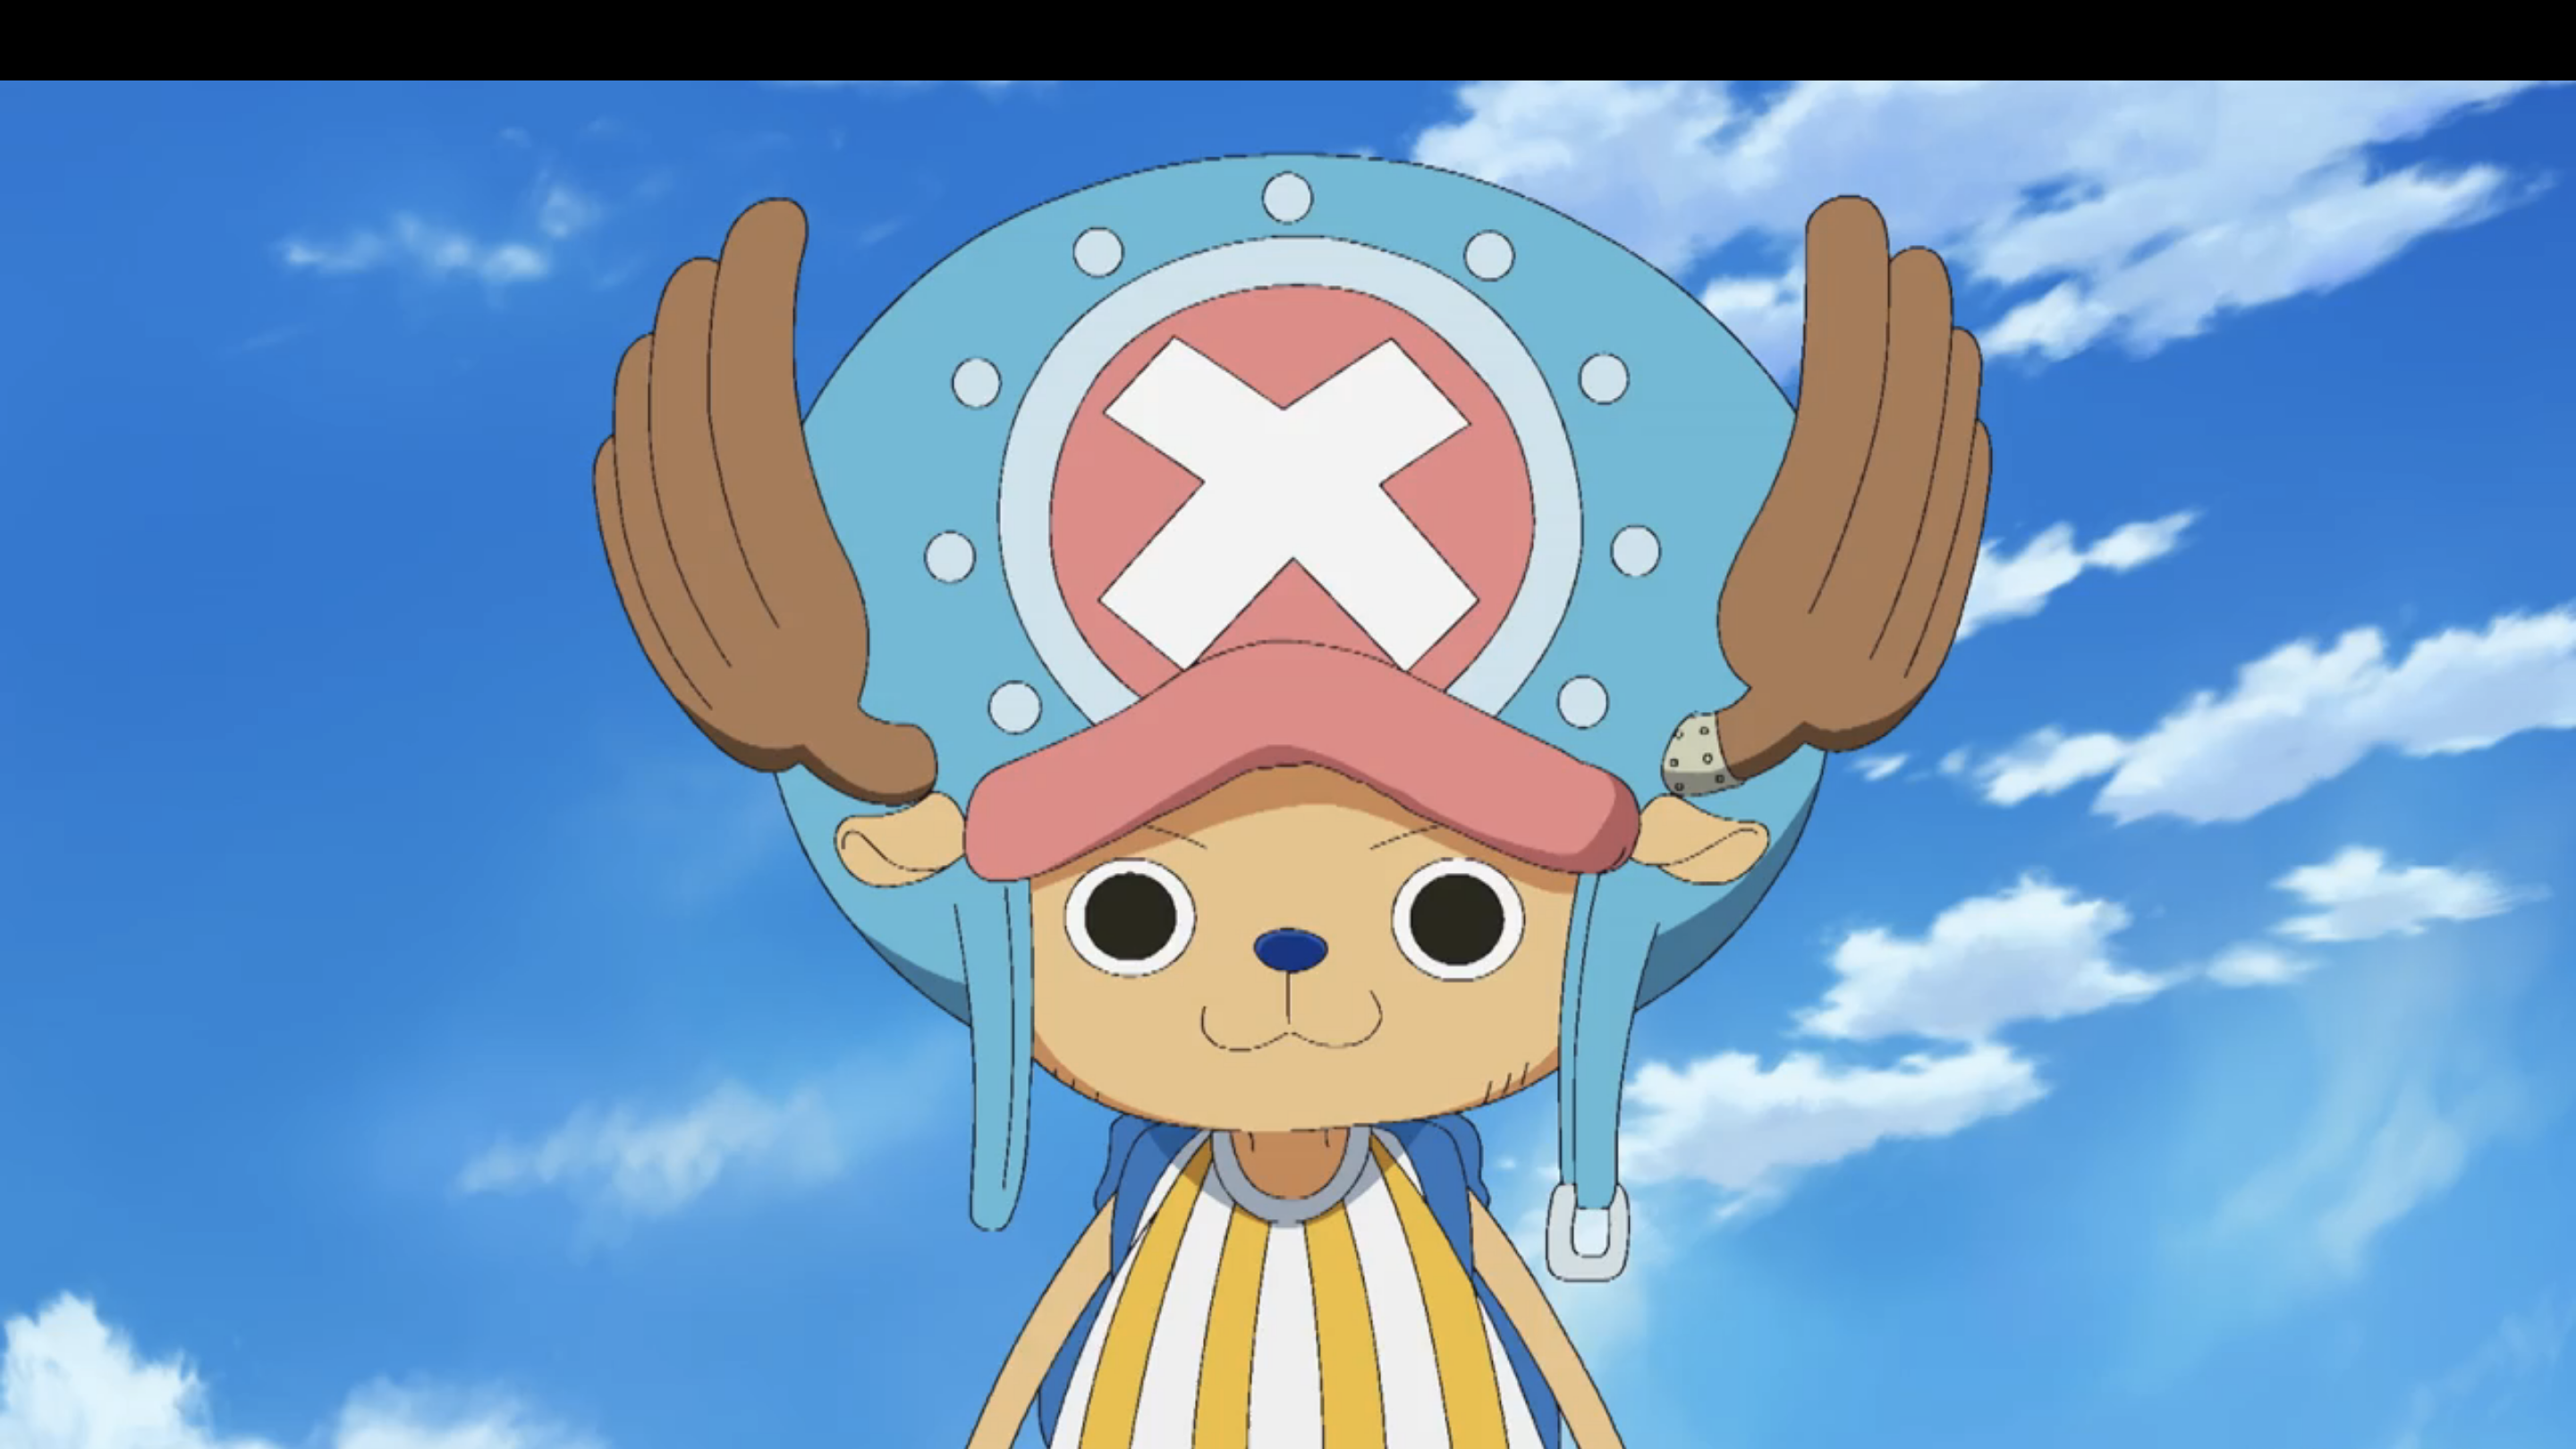 One Piece Chopper: Everything About The Doctor Coming In Season 2